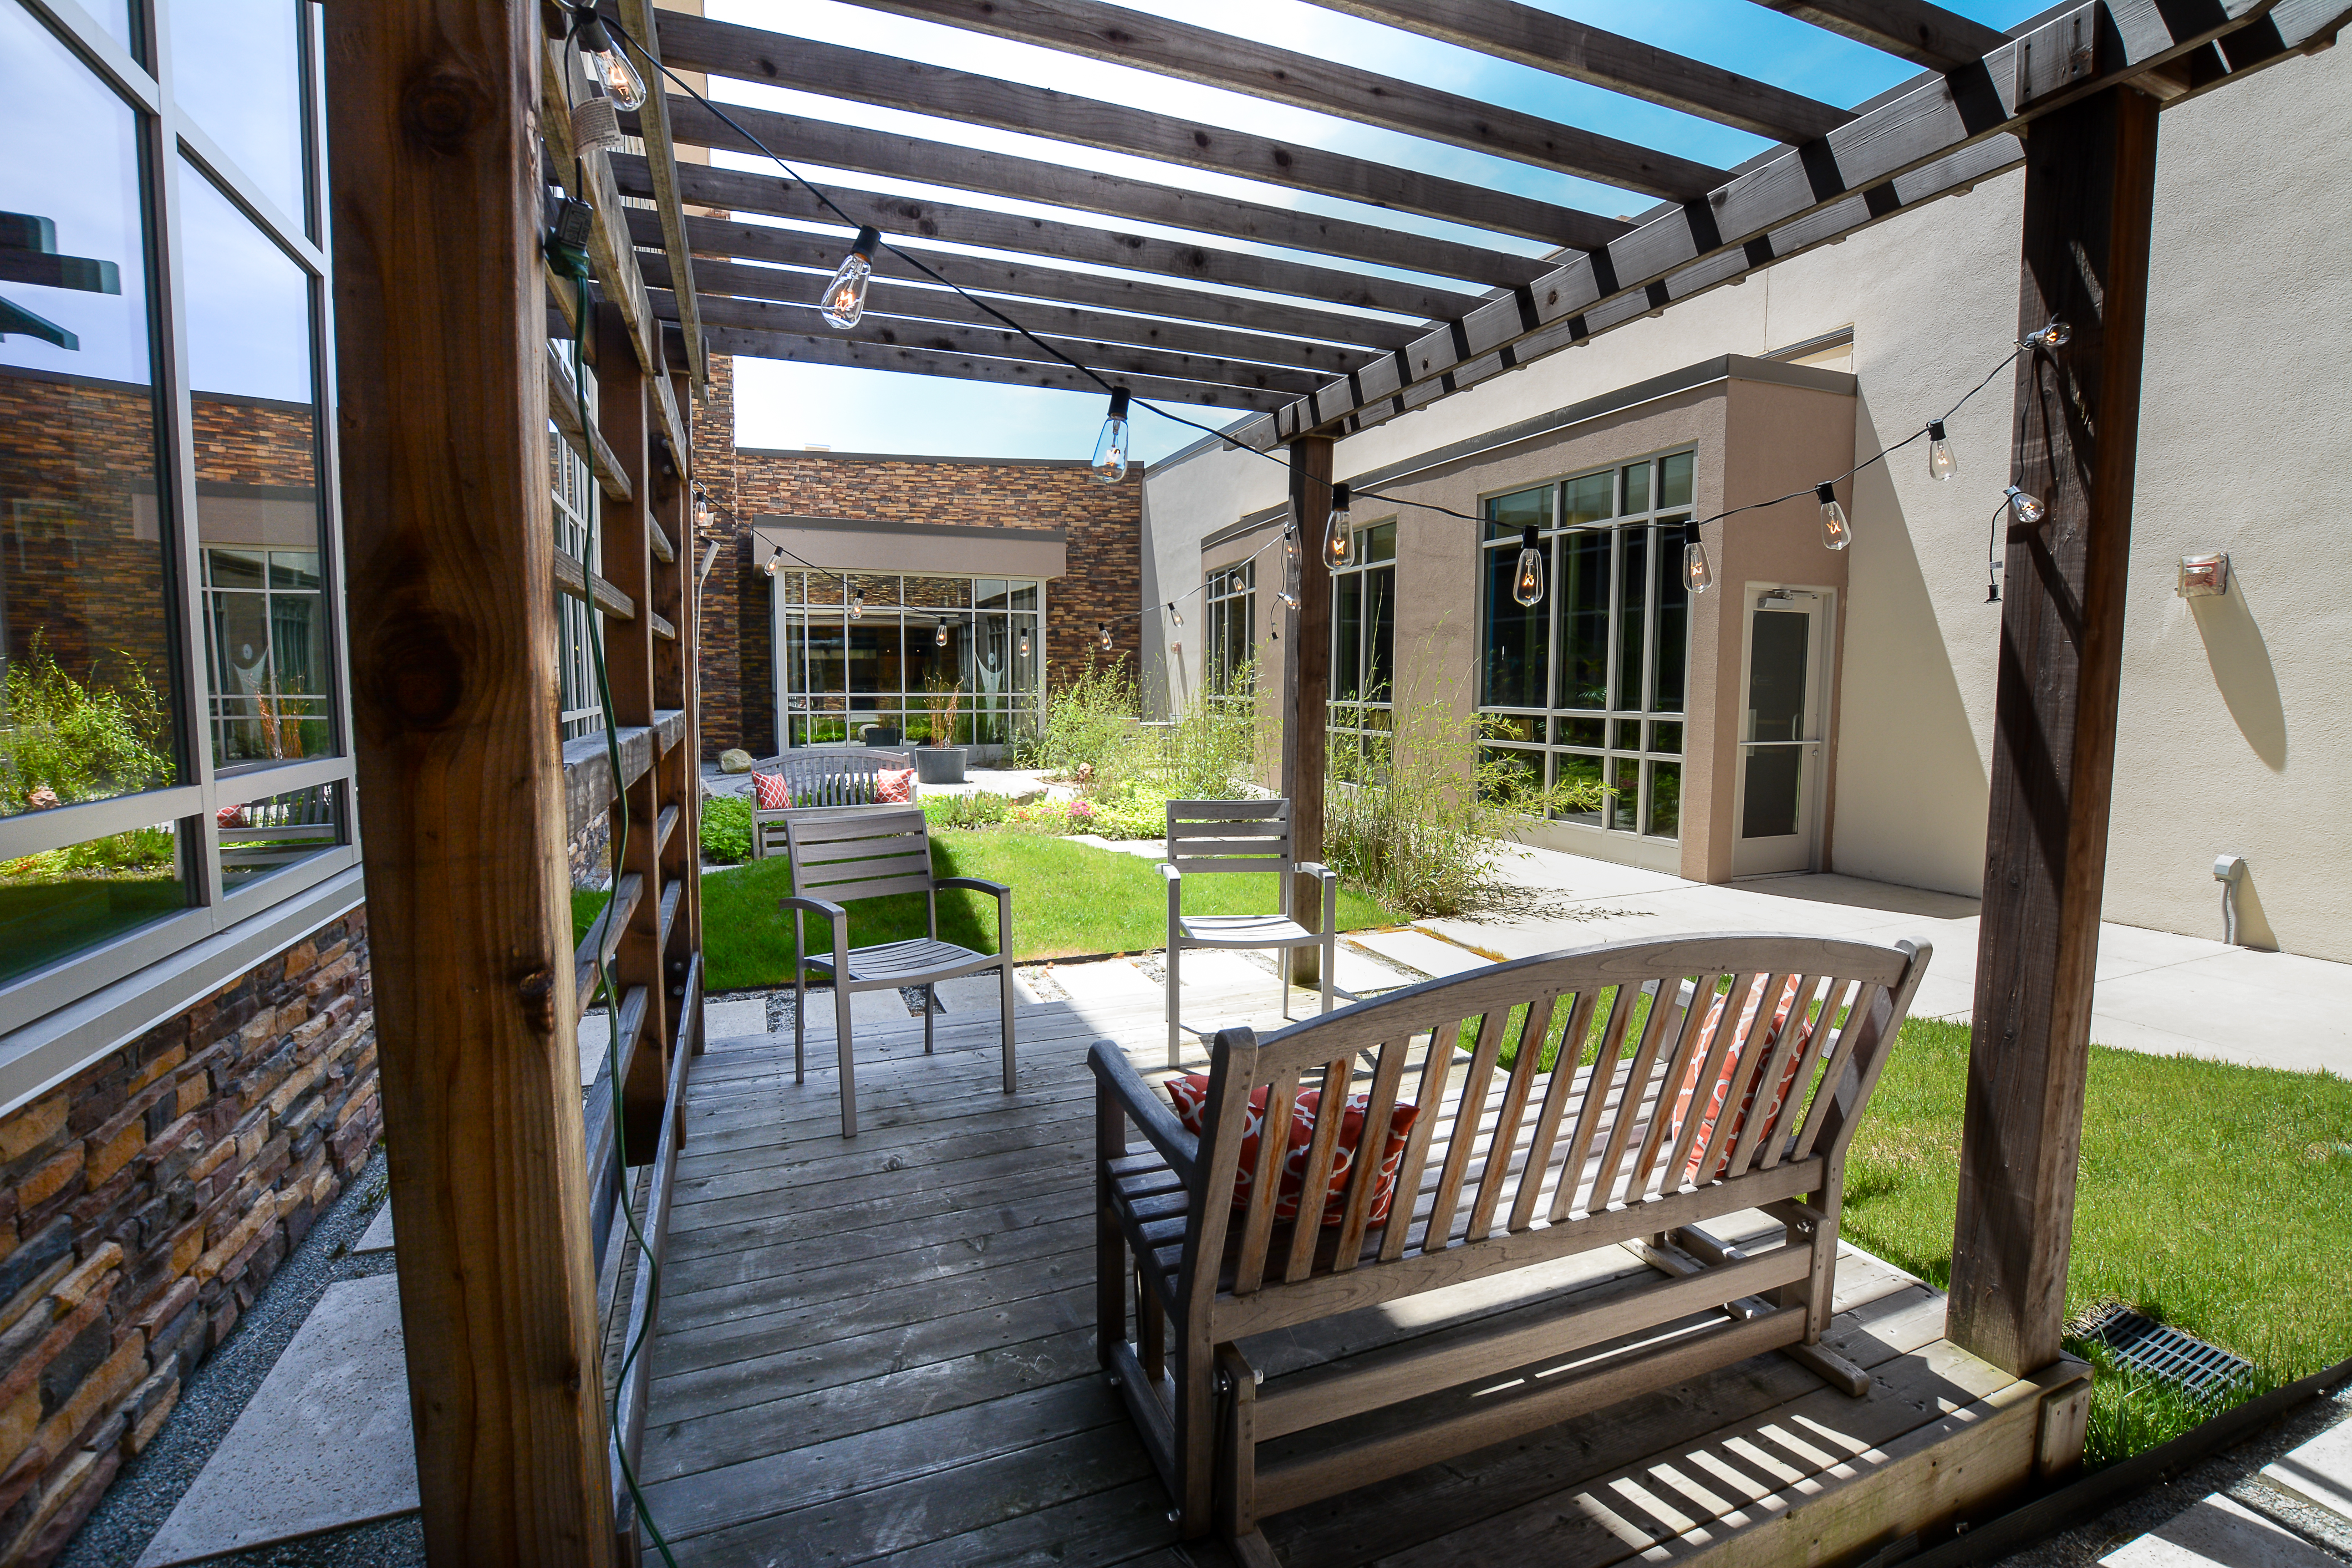 PONDER is the largest of our two courtyards. Enjoy casual seating and conversation under the pergola or lunch at our bistro tables.